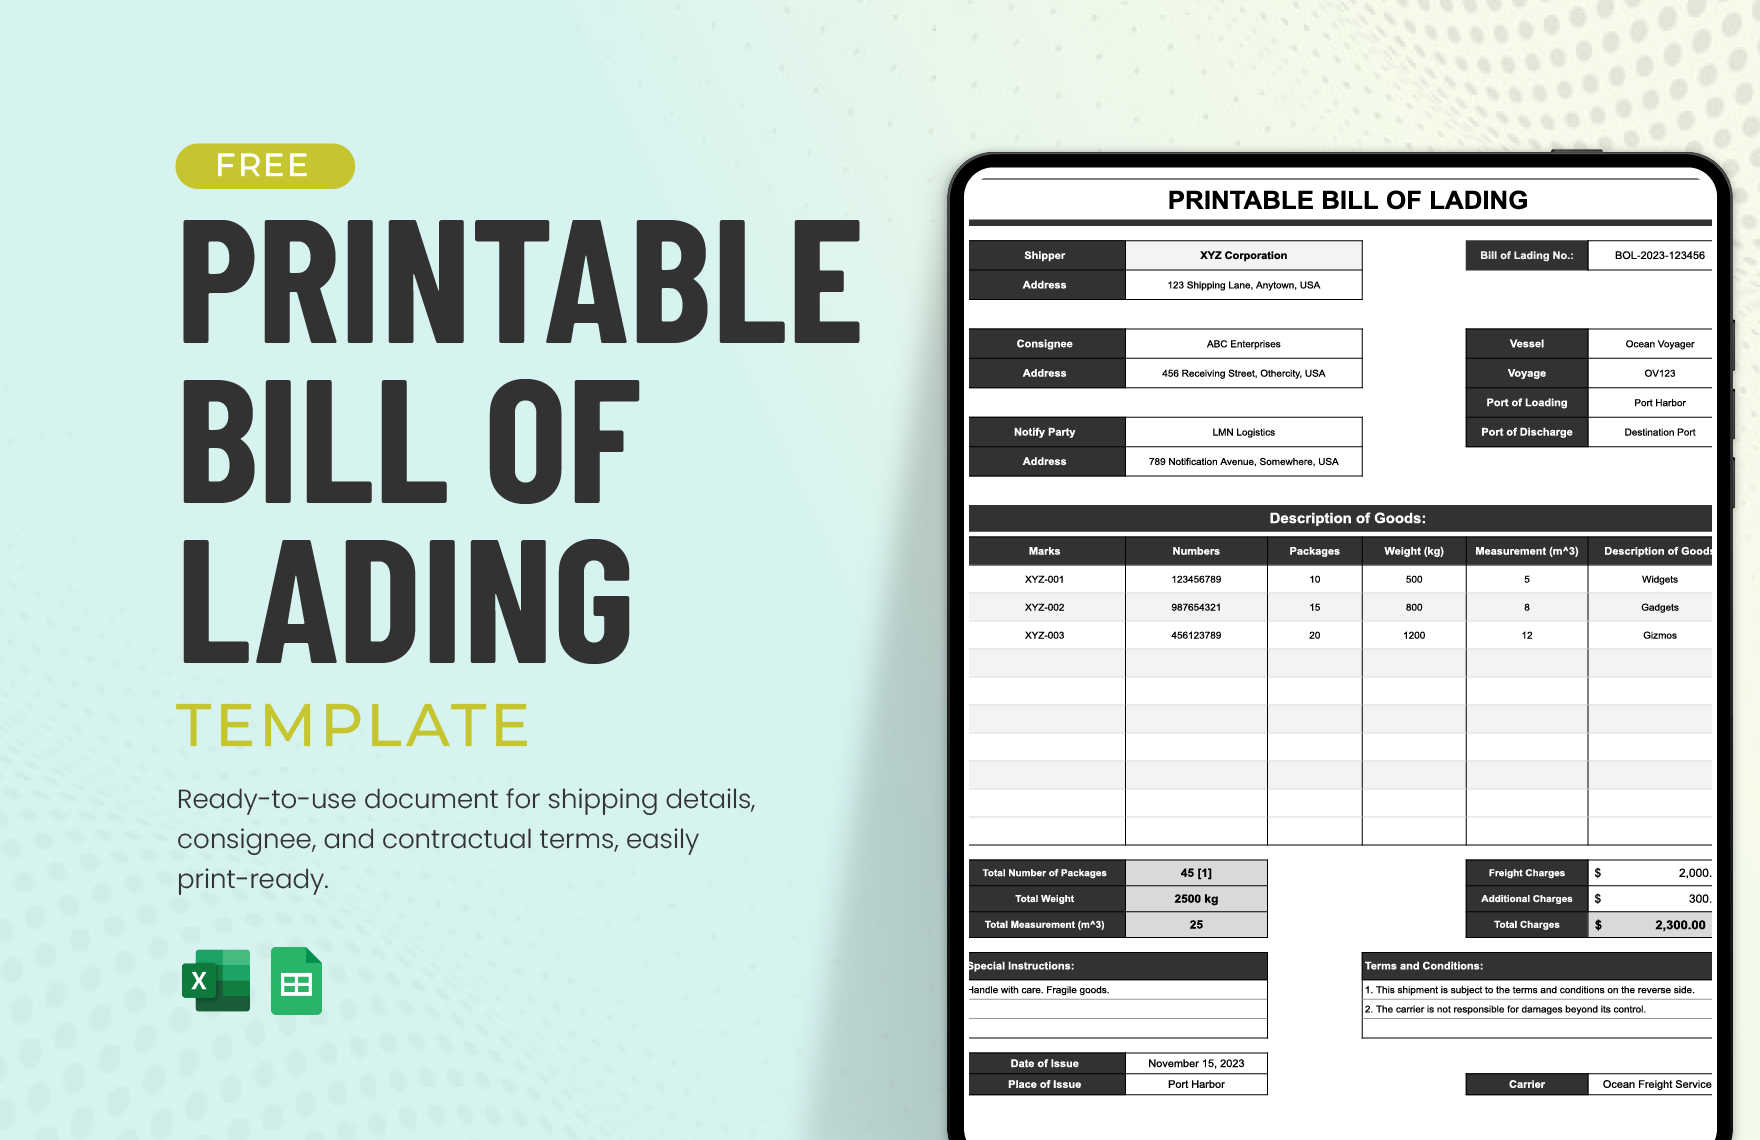 Printable Bill of Lading Template